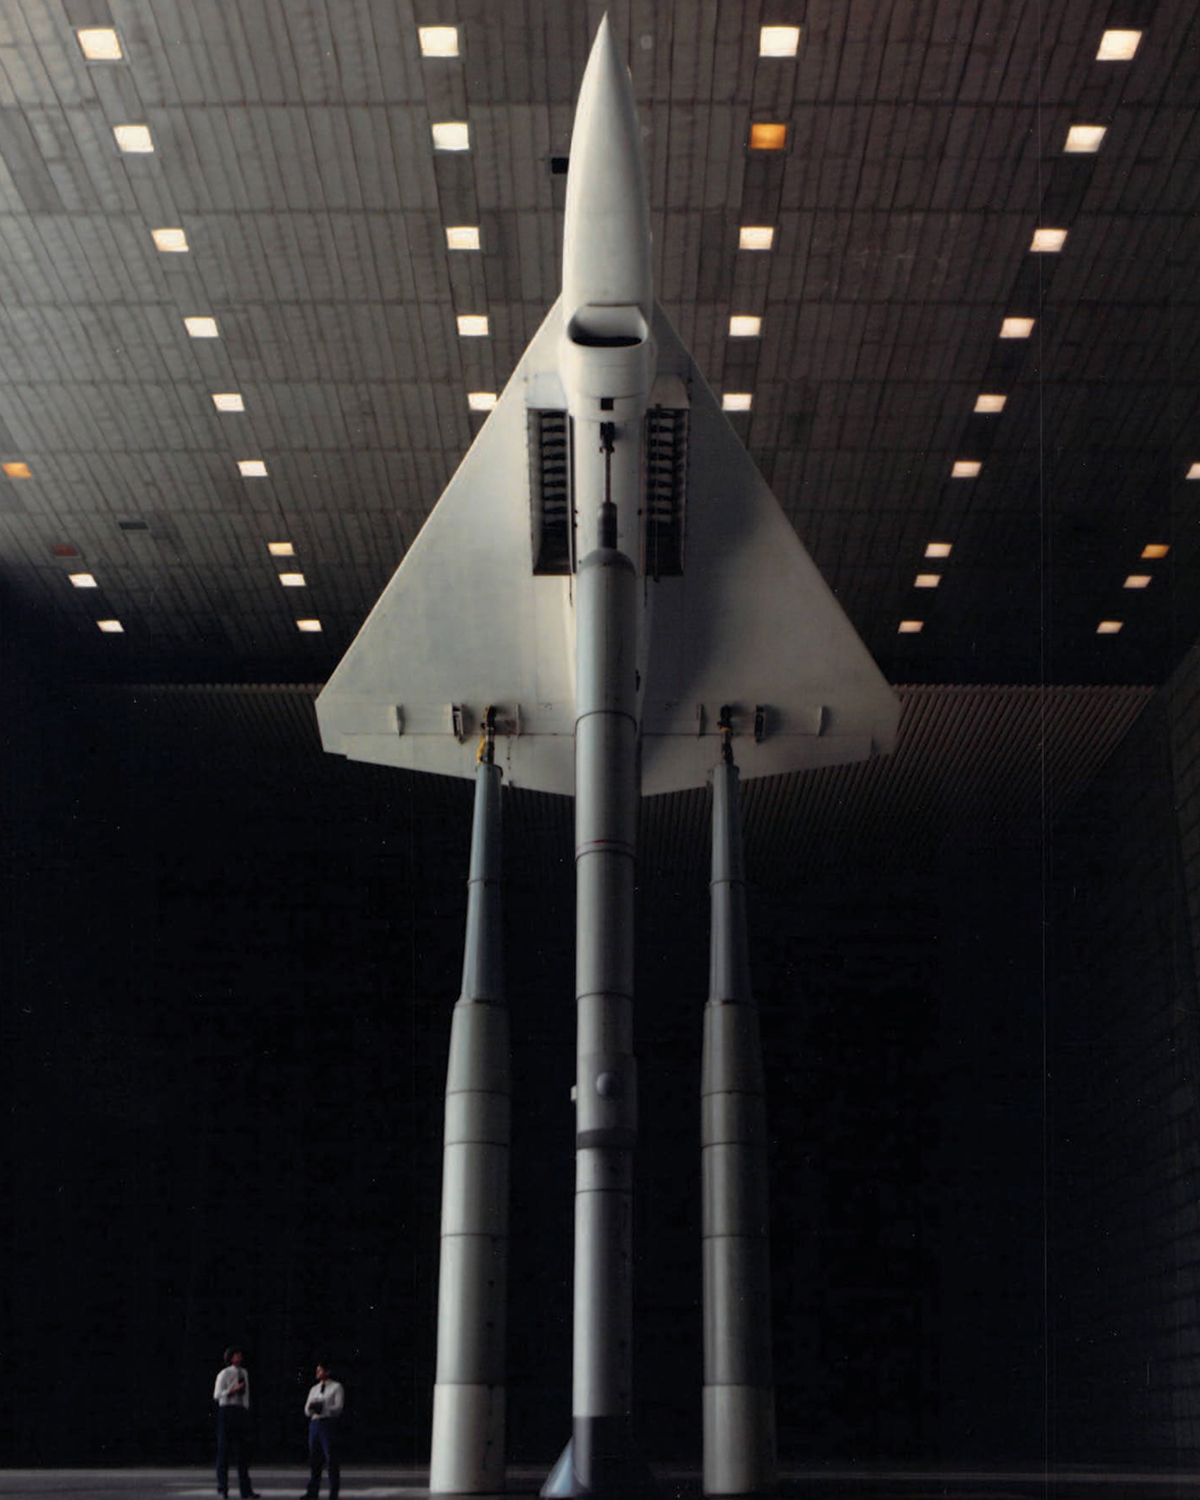 Two men stand below an aircraft raised above the floor on tall columns, with a triangular body and sharp nose cone pointed to the wind tunnel ceiling.